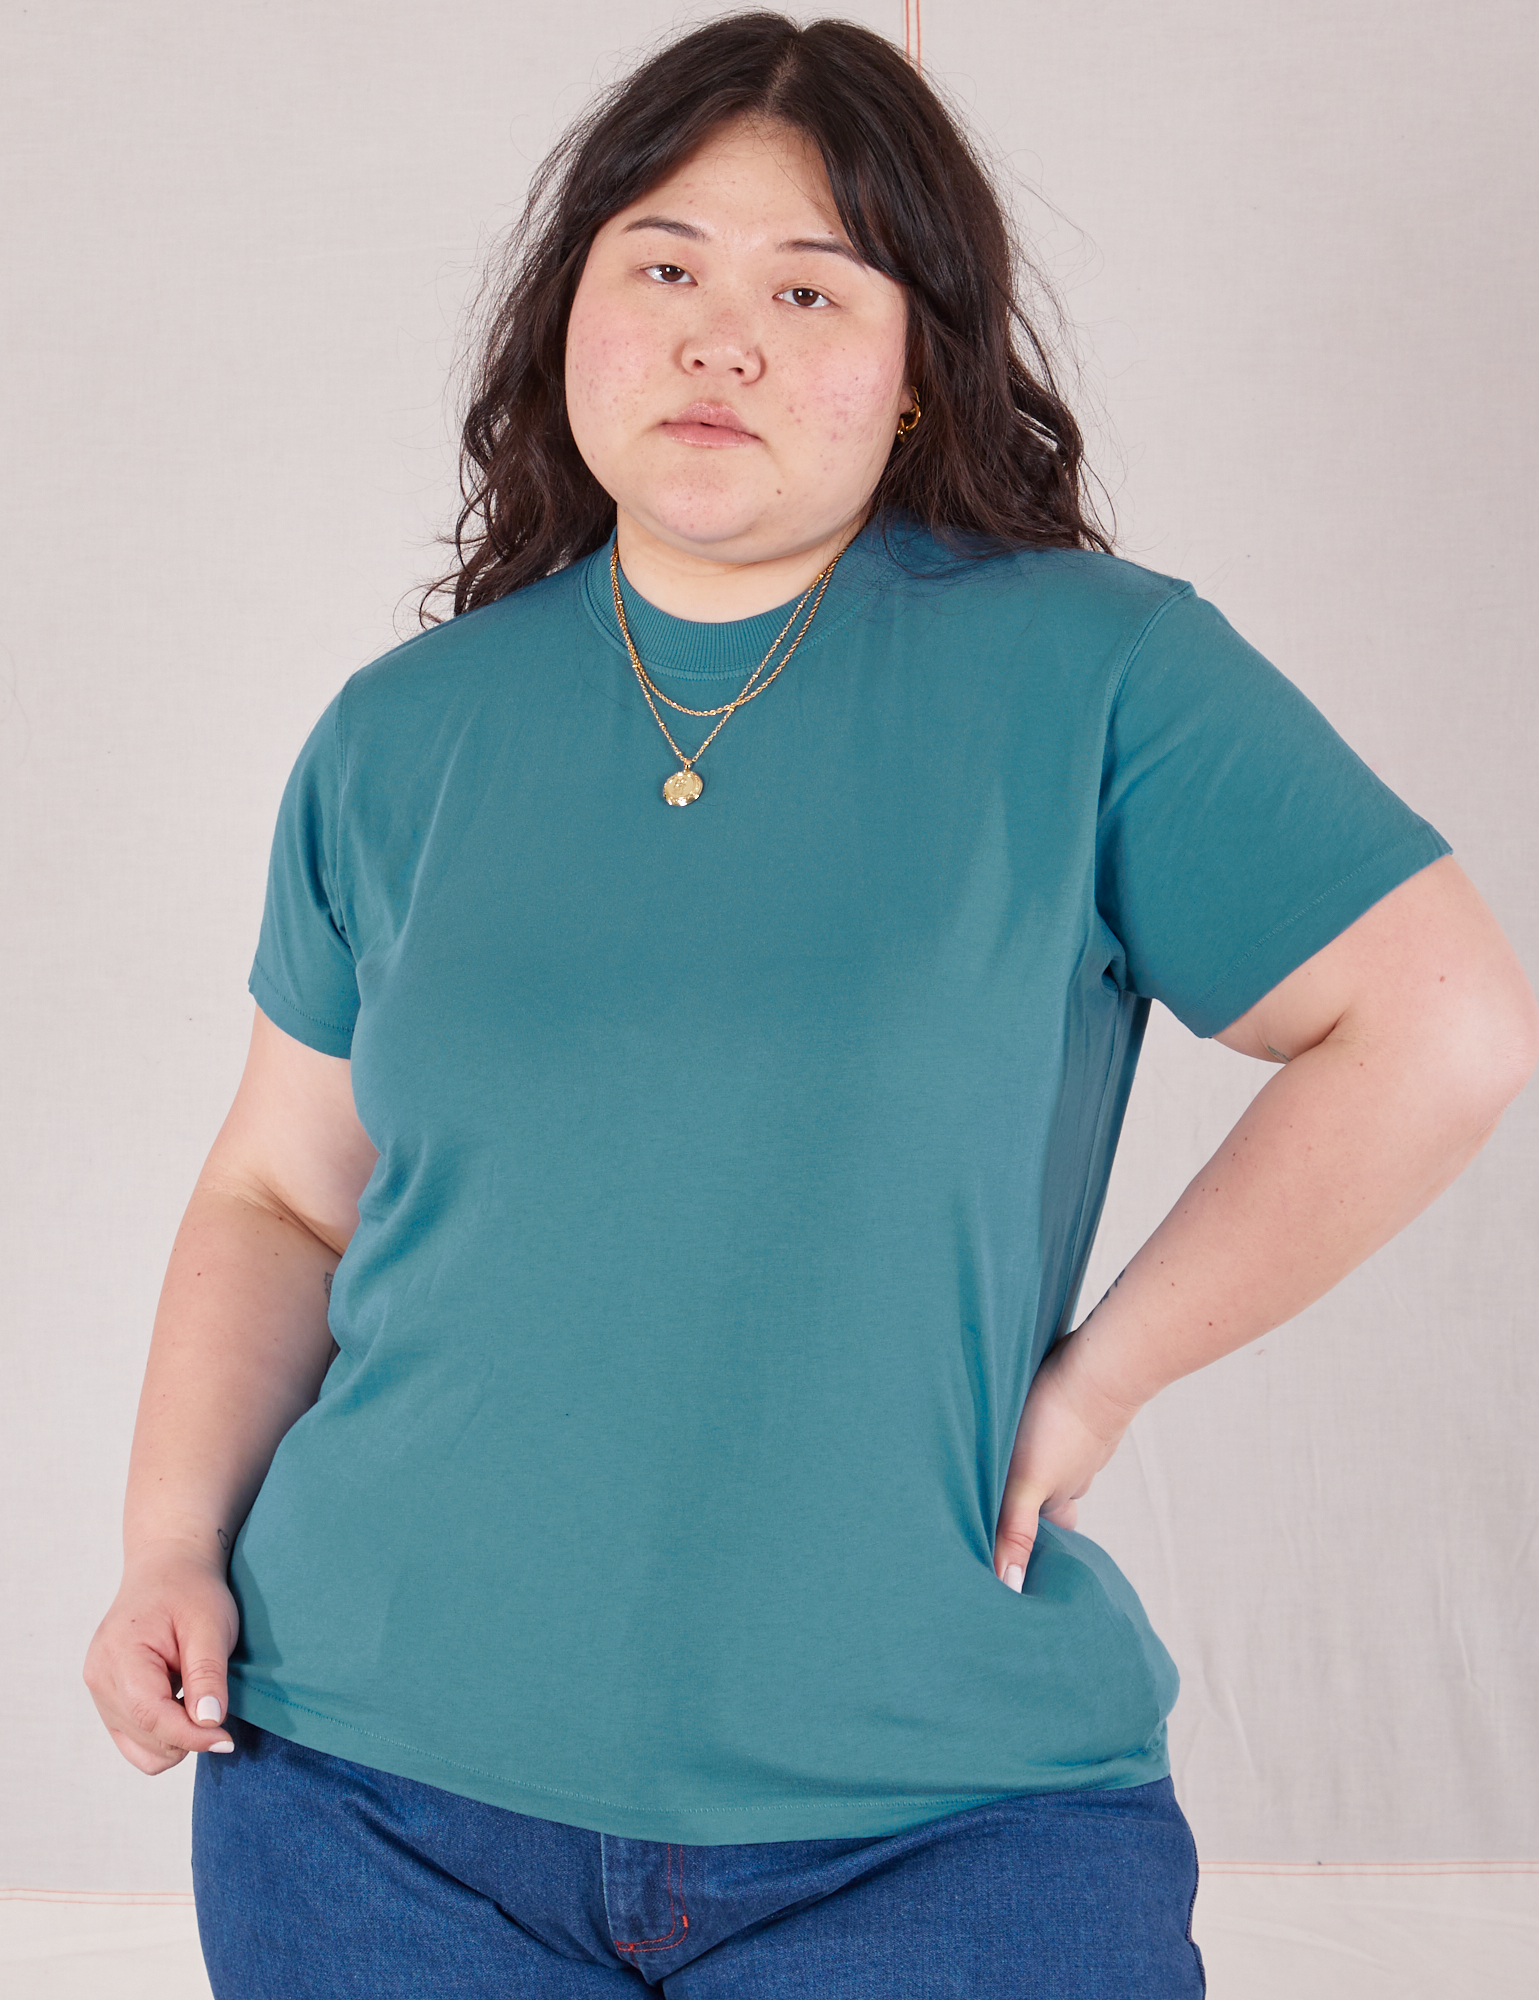 Ashley is 5&#39;7&quot; and wearing L Organic Vintage Tee in Marine Blue